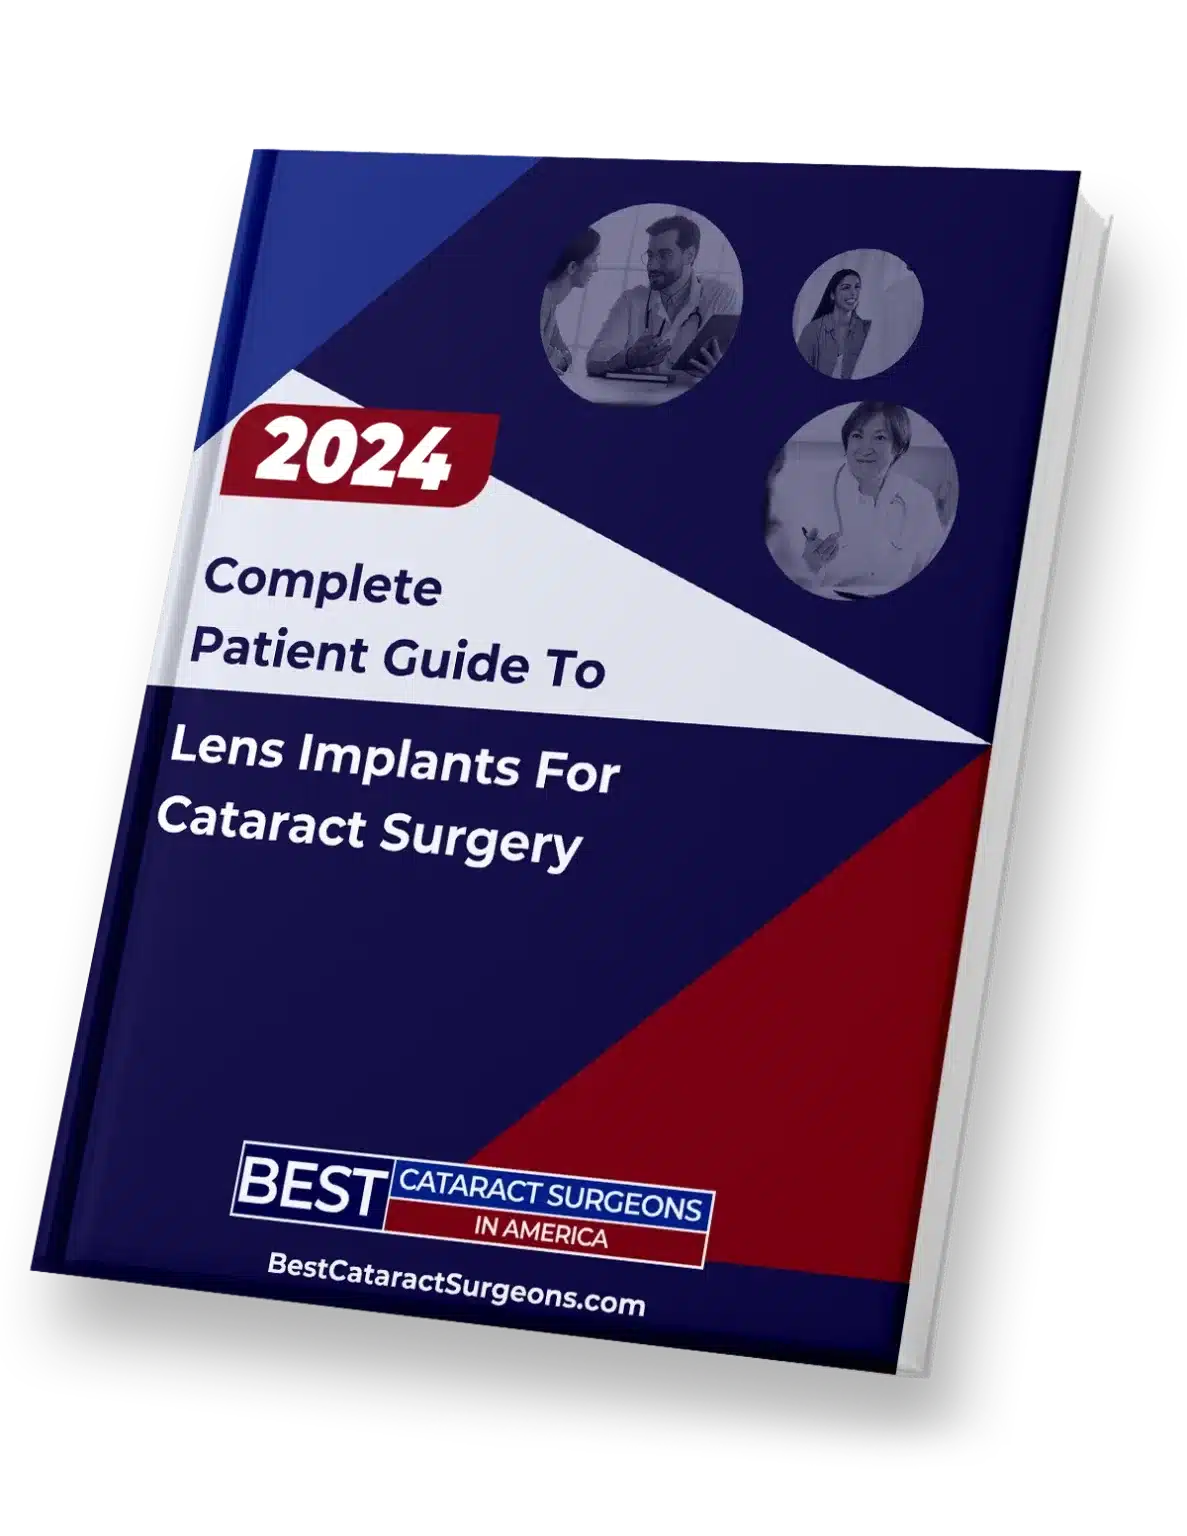 Complete Patient Guide To Lens Implants For Cataract Surgery 2024